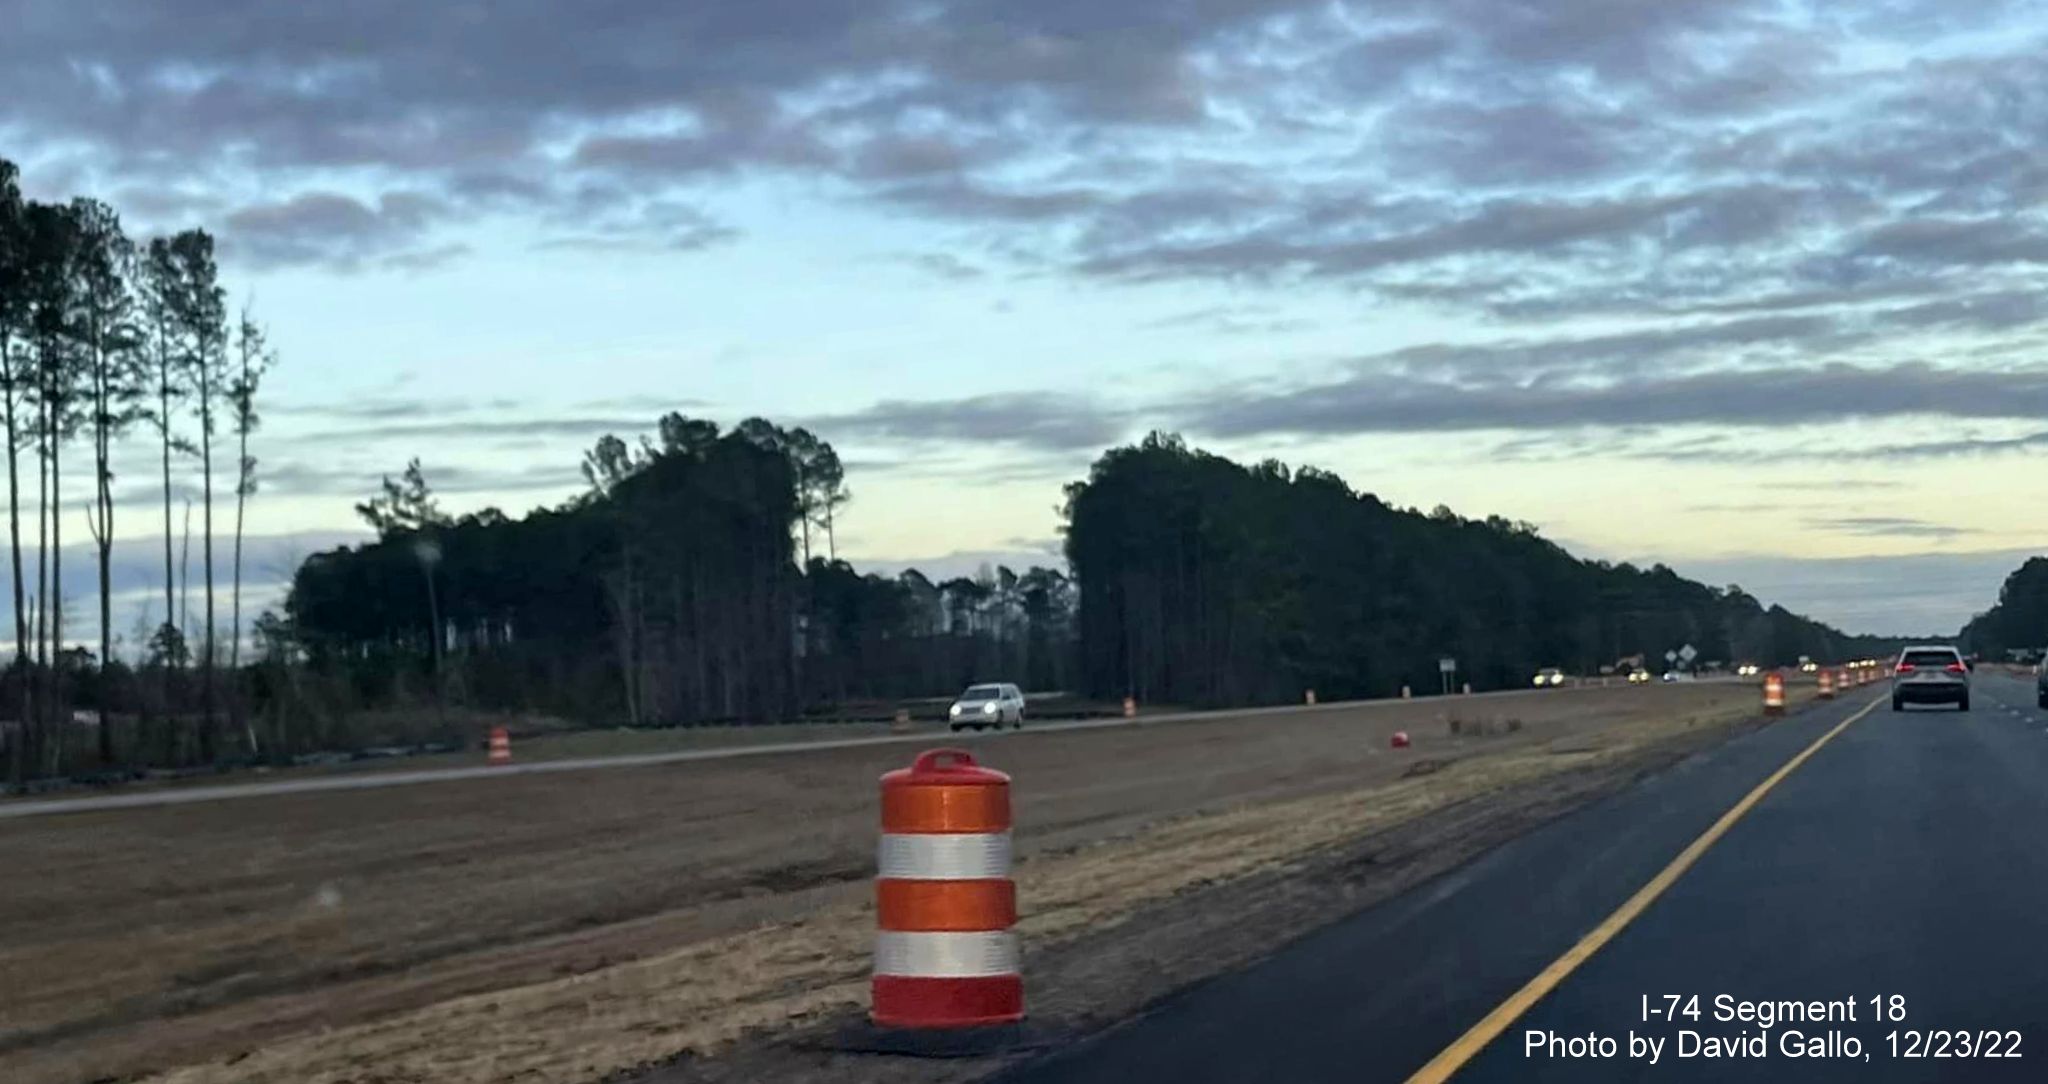 Image of graded median in Lake Waccamaw interchange work zone on US 74/76 (Future I-74) East, by David Gallo, December 2022